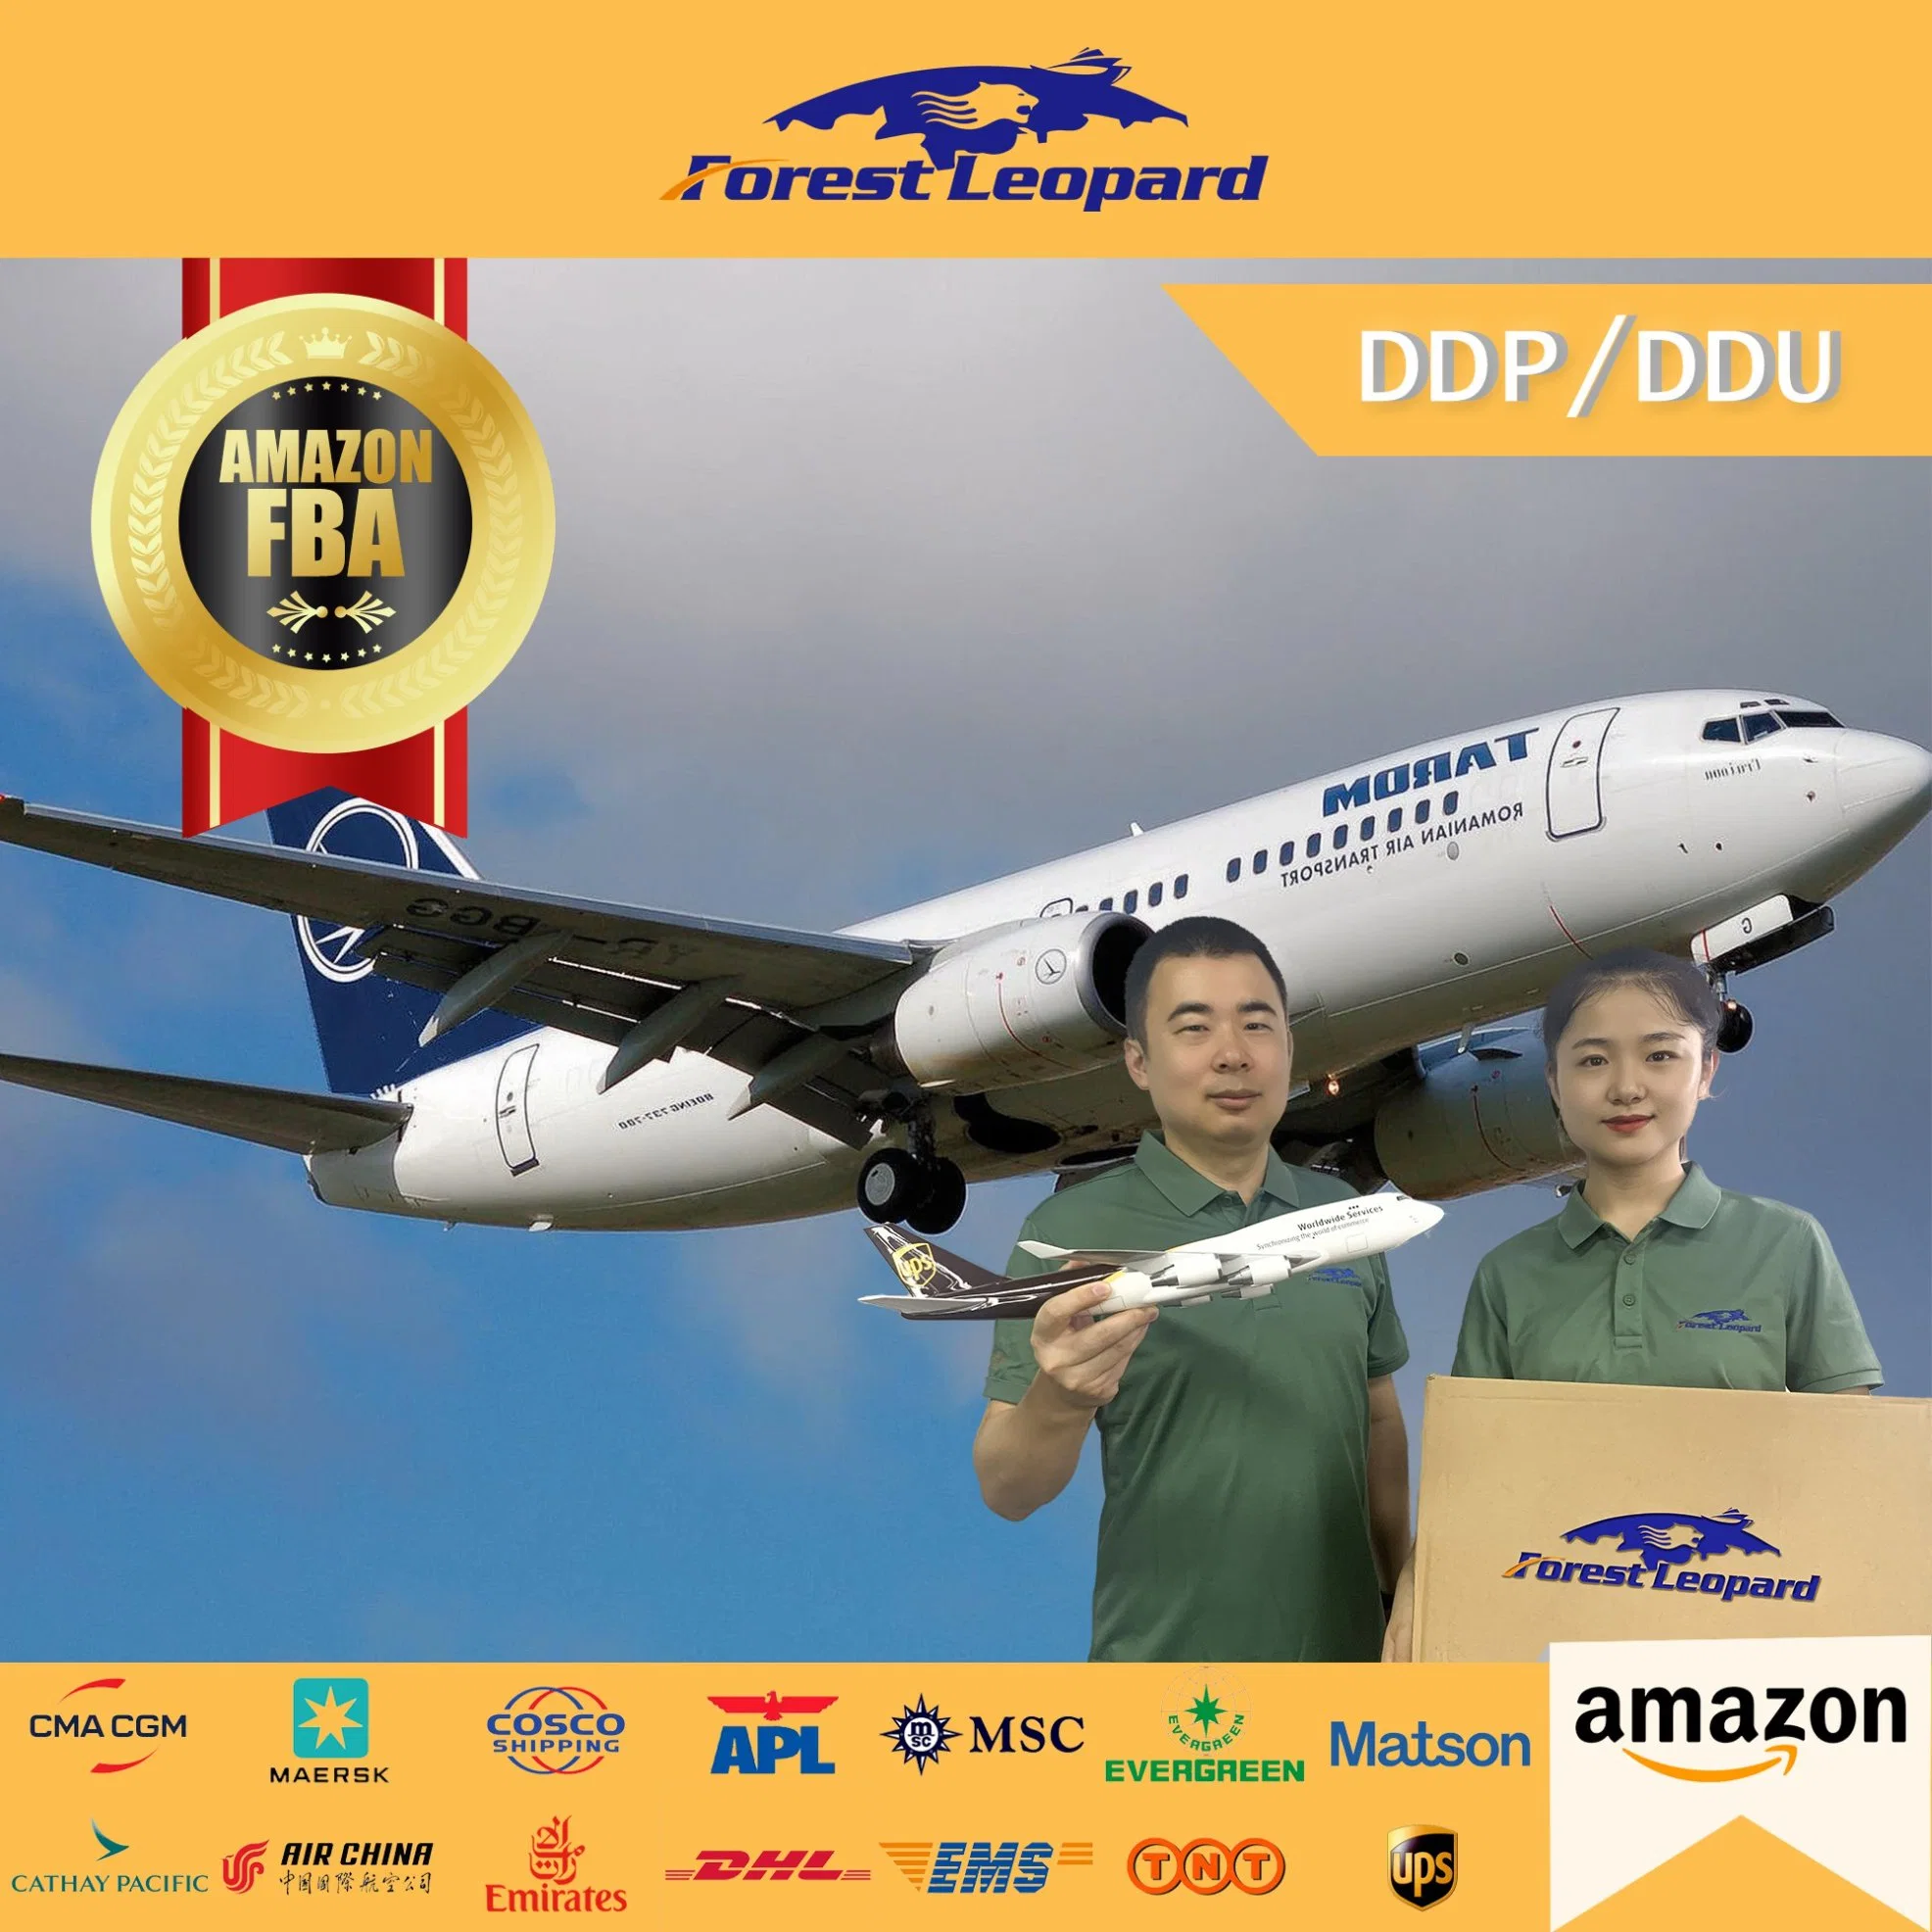 Dpd Air Cargo Service UPS China to UK Cheap Cost Delivery to Door Step Customs Clearance Included